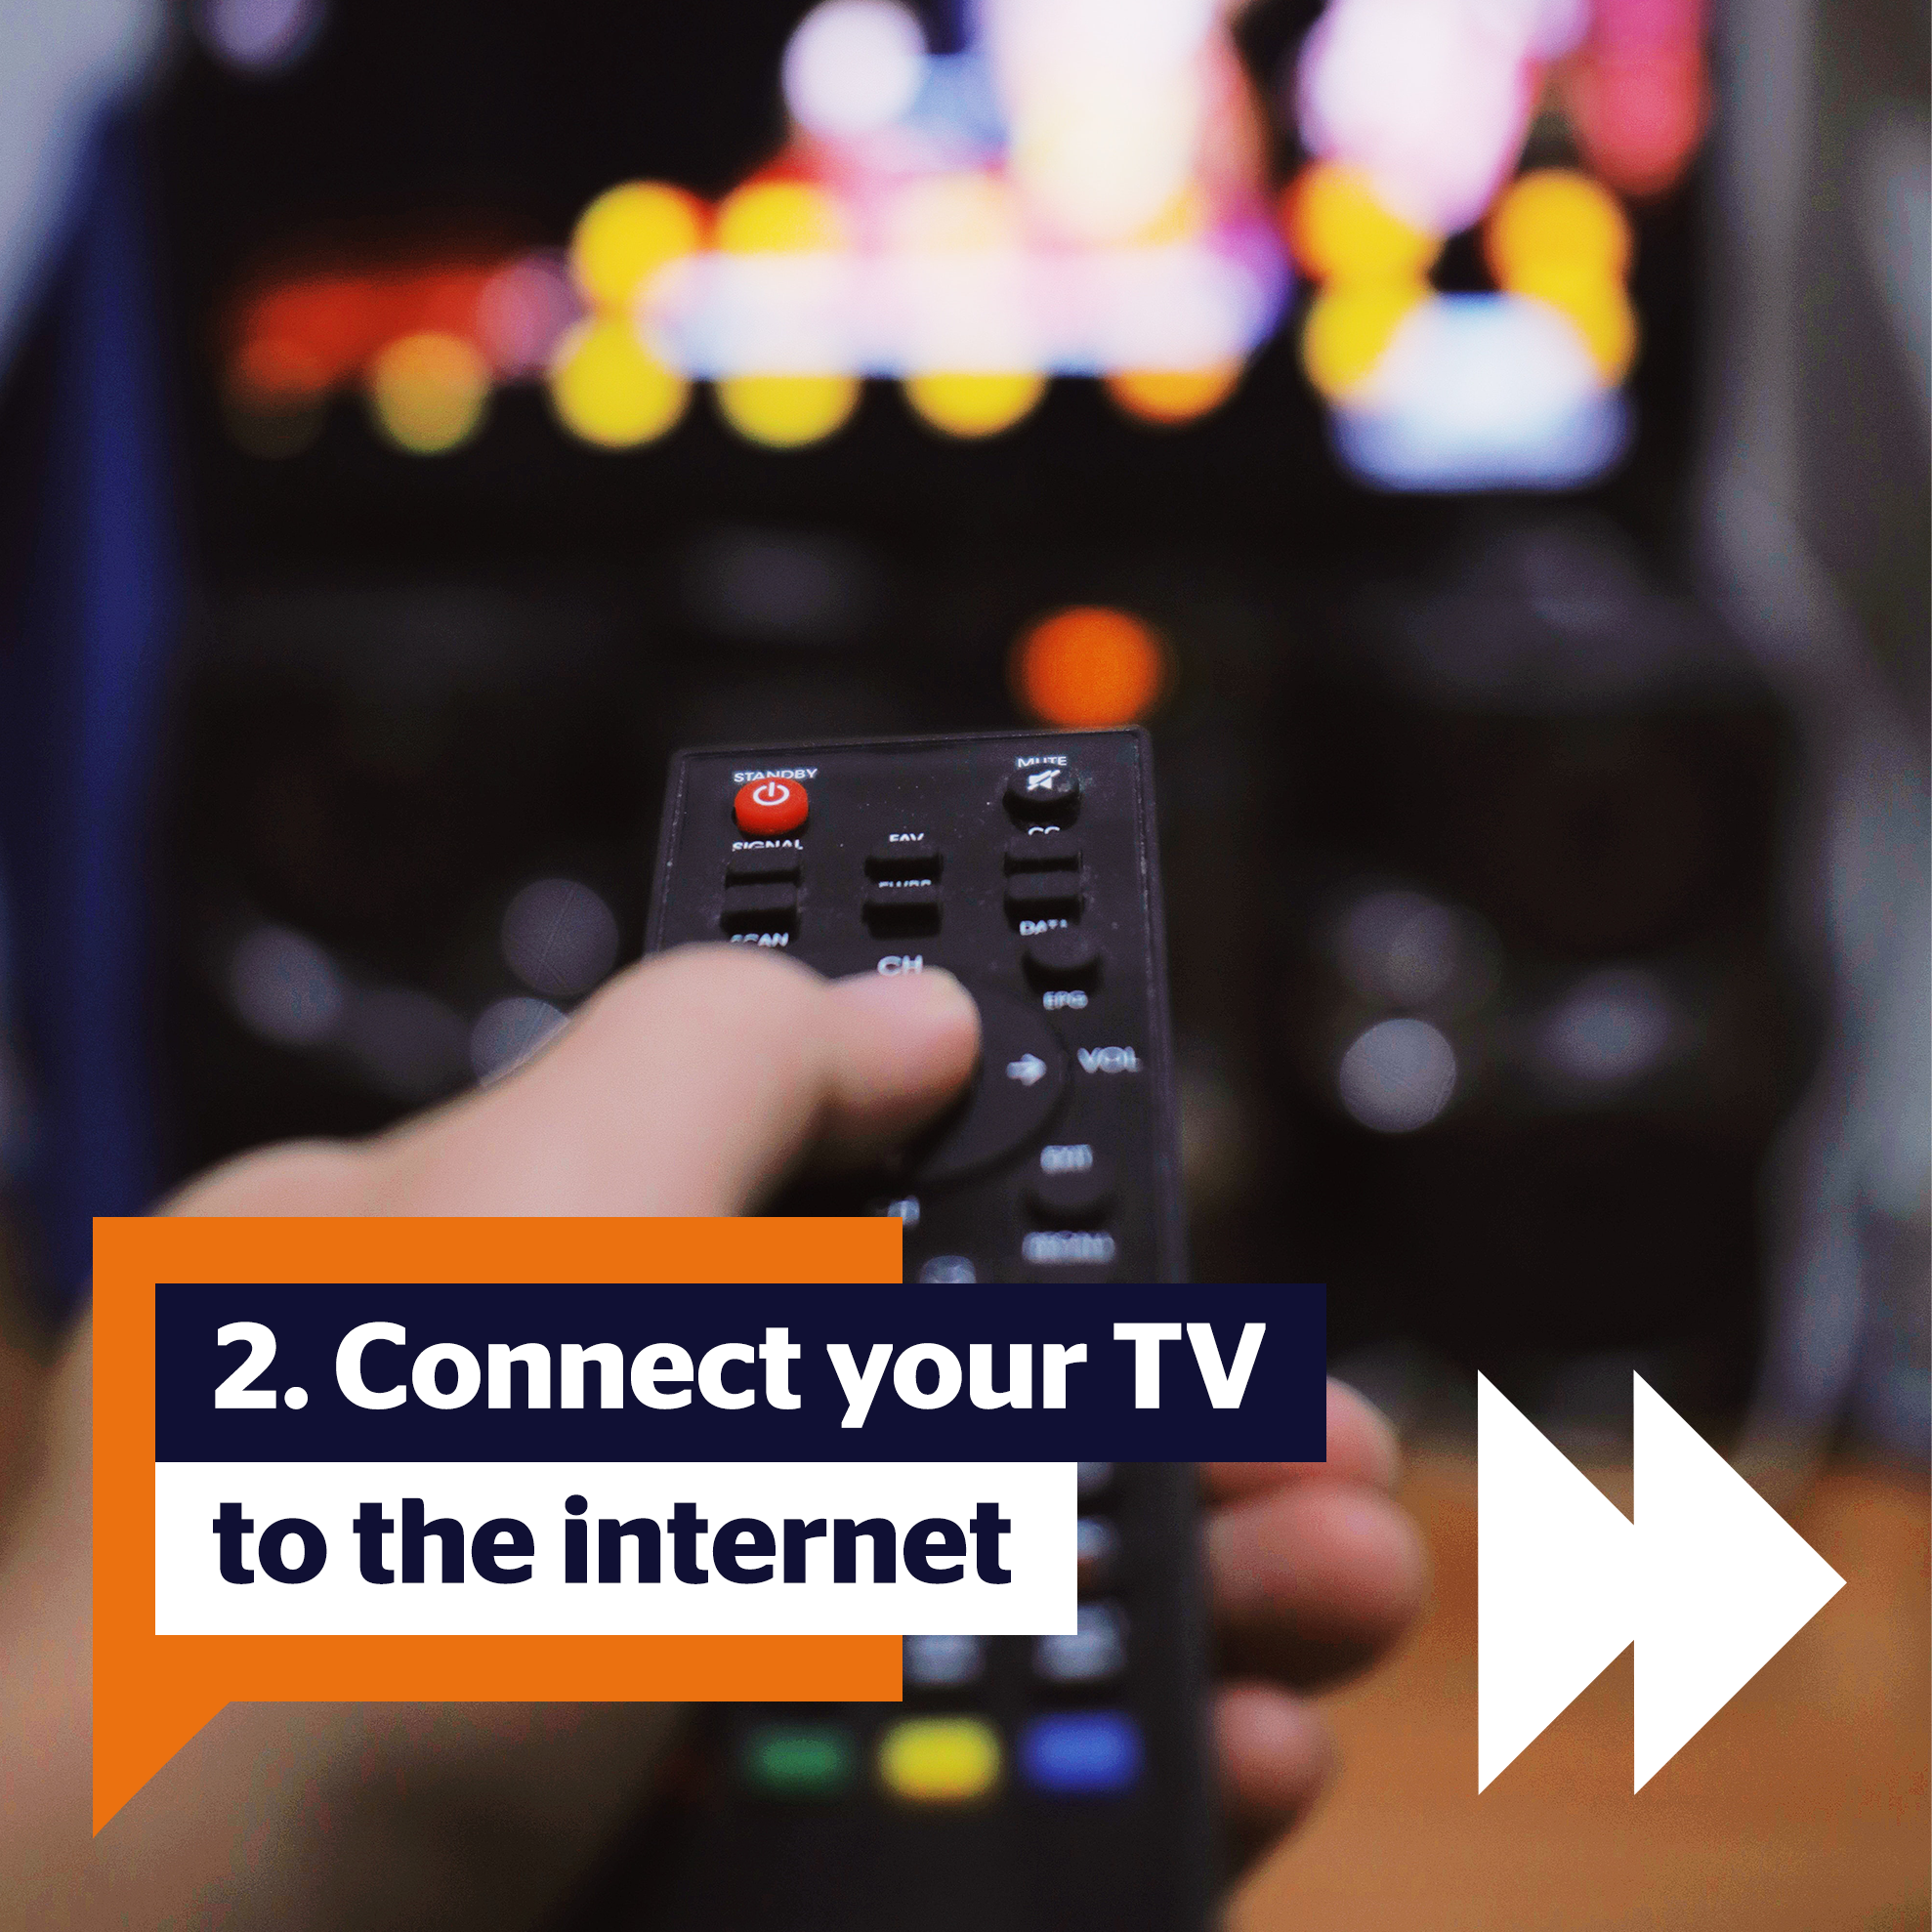 Step 2: Connect you TV to the internet. Image behind is oa hand on a remote control pointing towards a TV screen which is blurred in the distance.